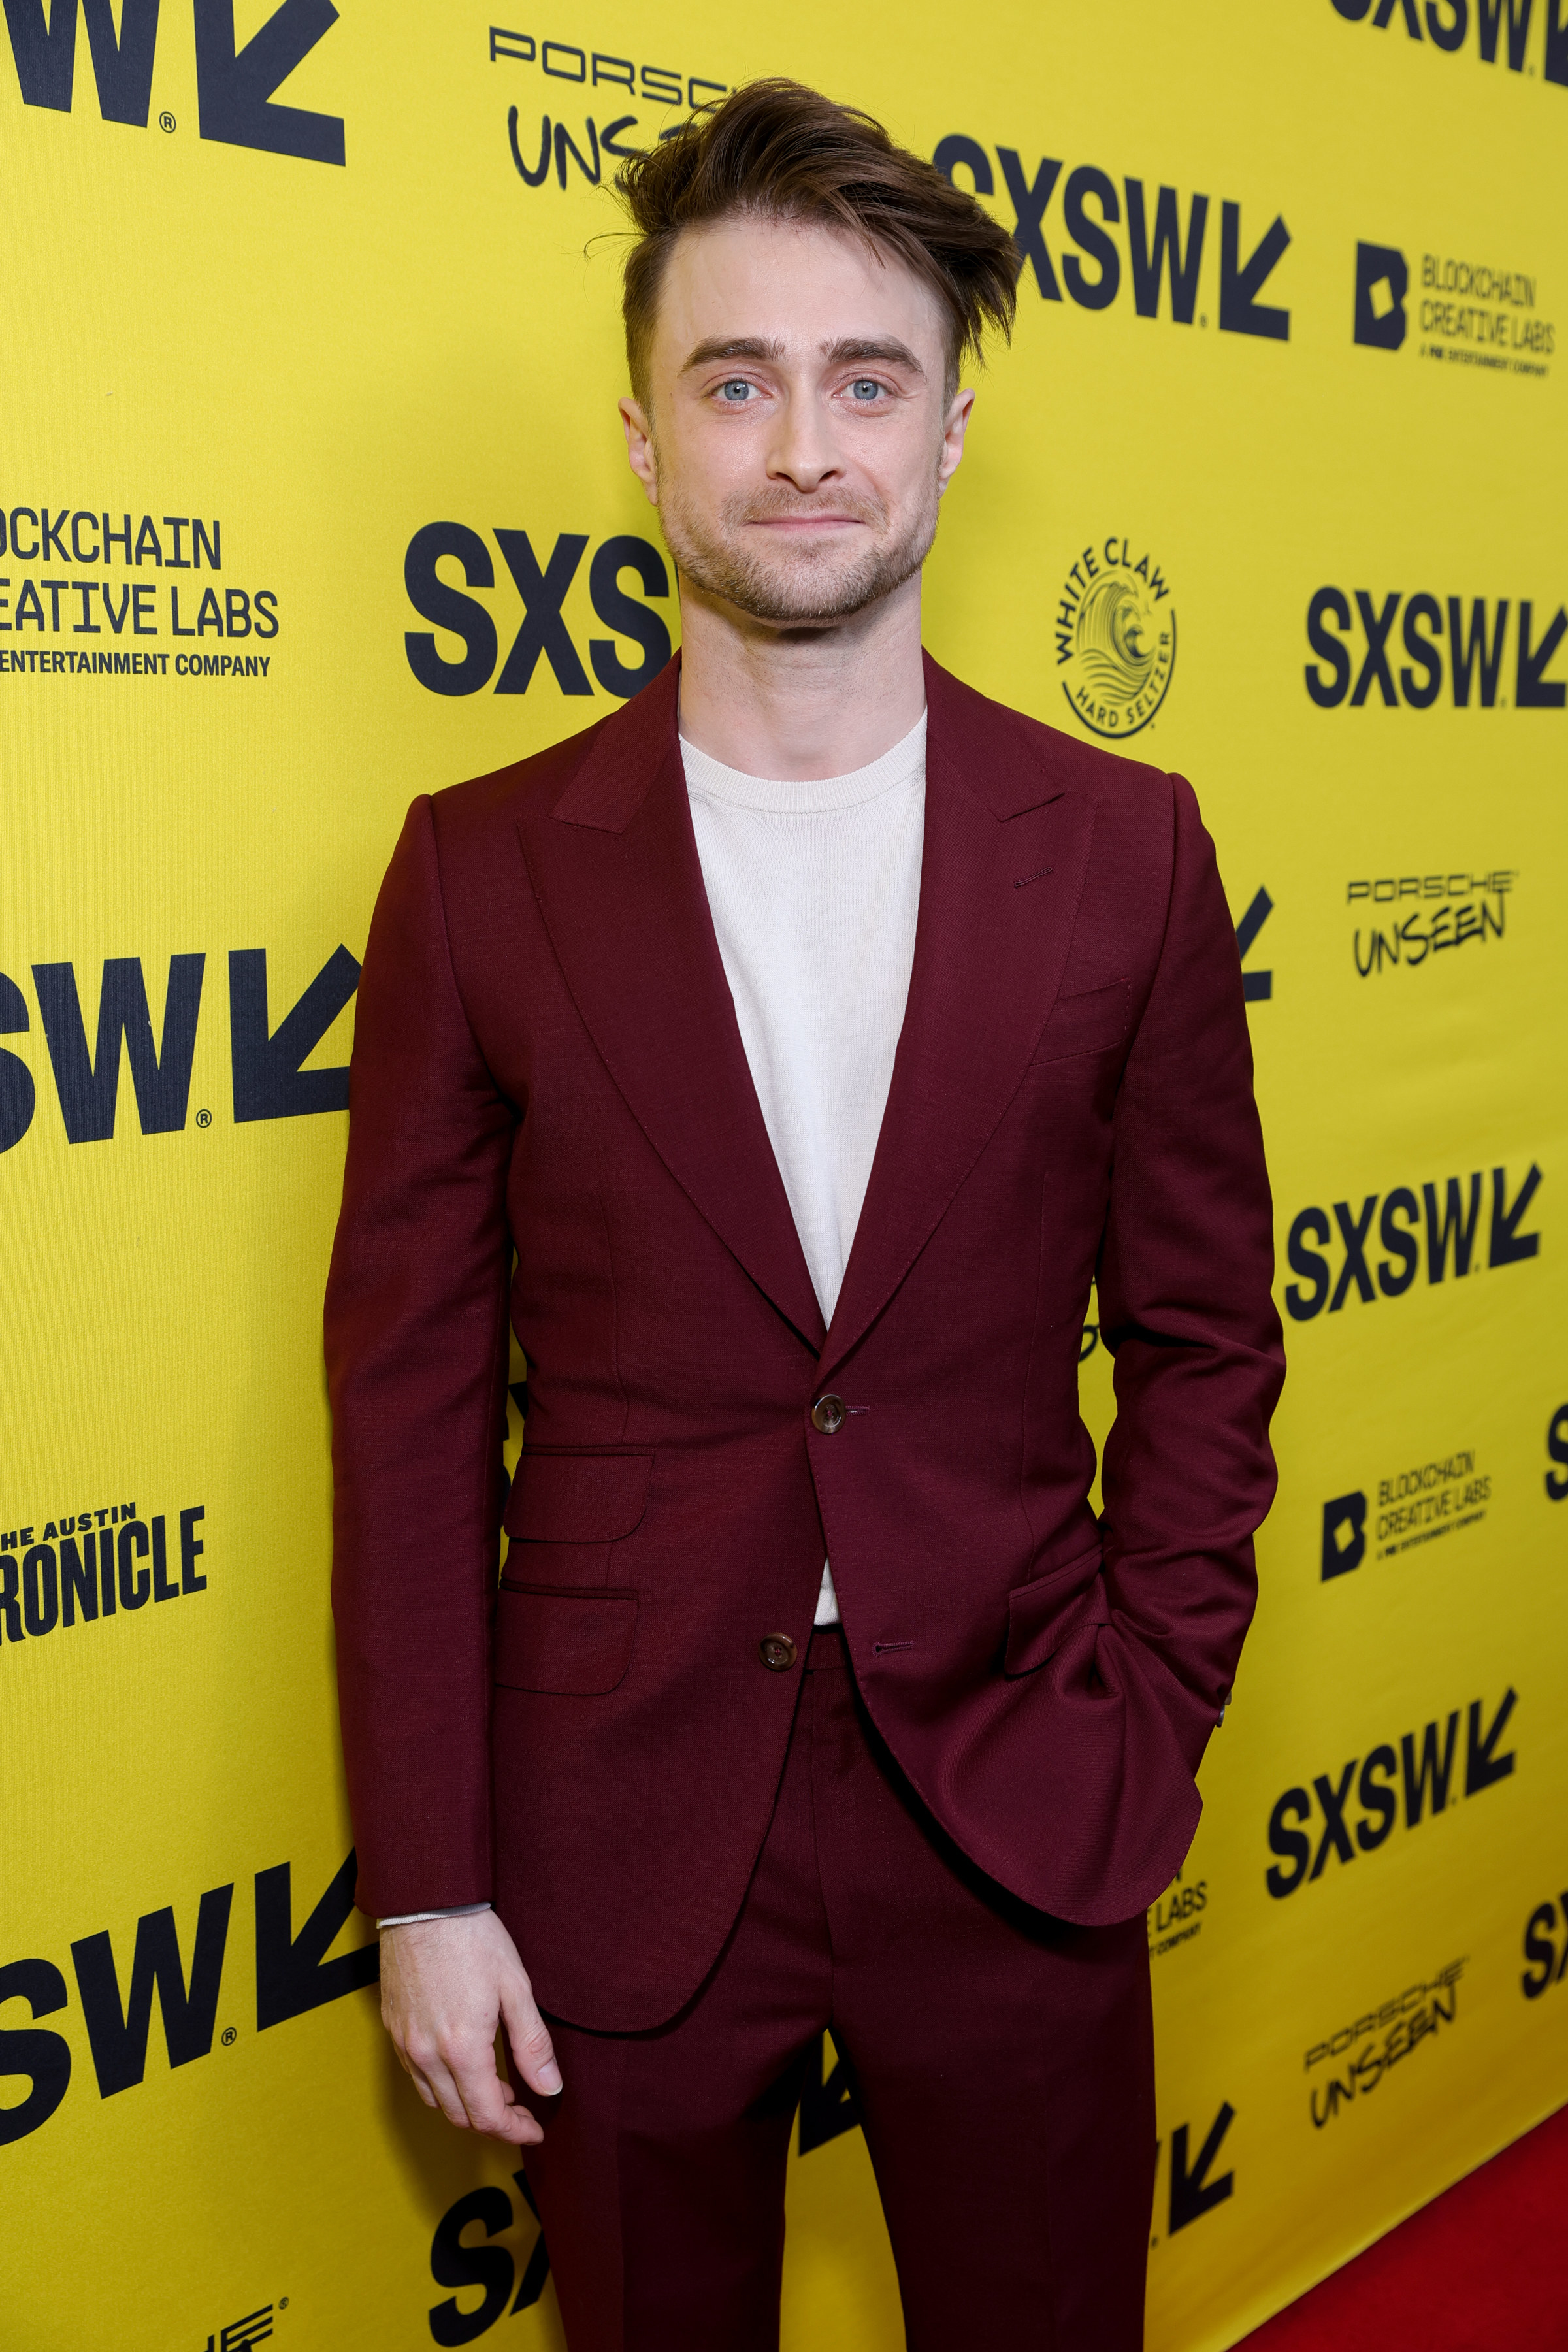 Daniel in a suit for a SXSW event